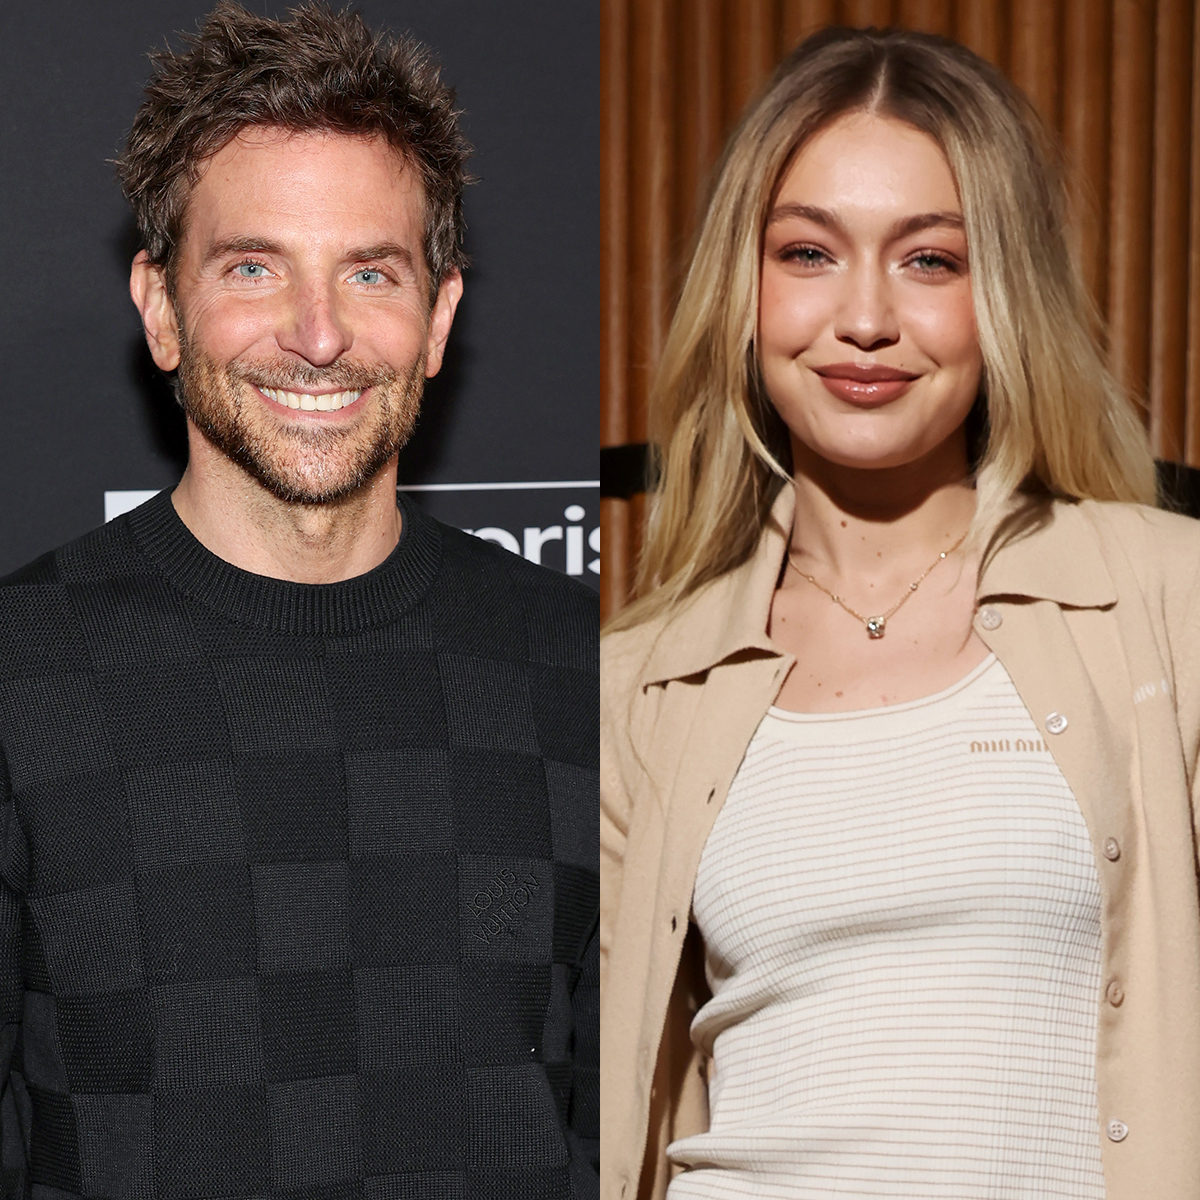 Bradley Cooper and Gigi Hadid Seal Their Romance With a Kiss in New PDA Photo